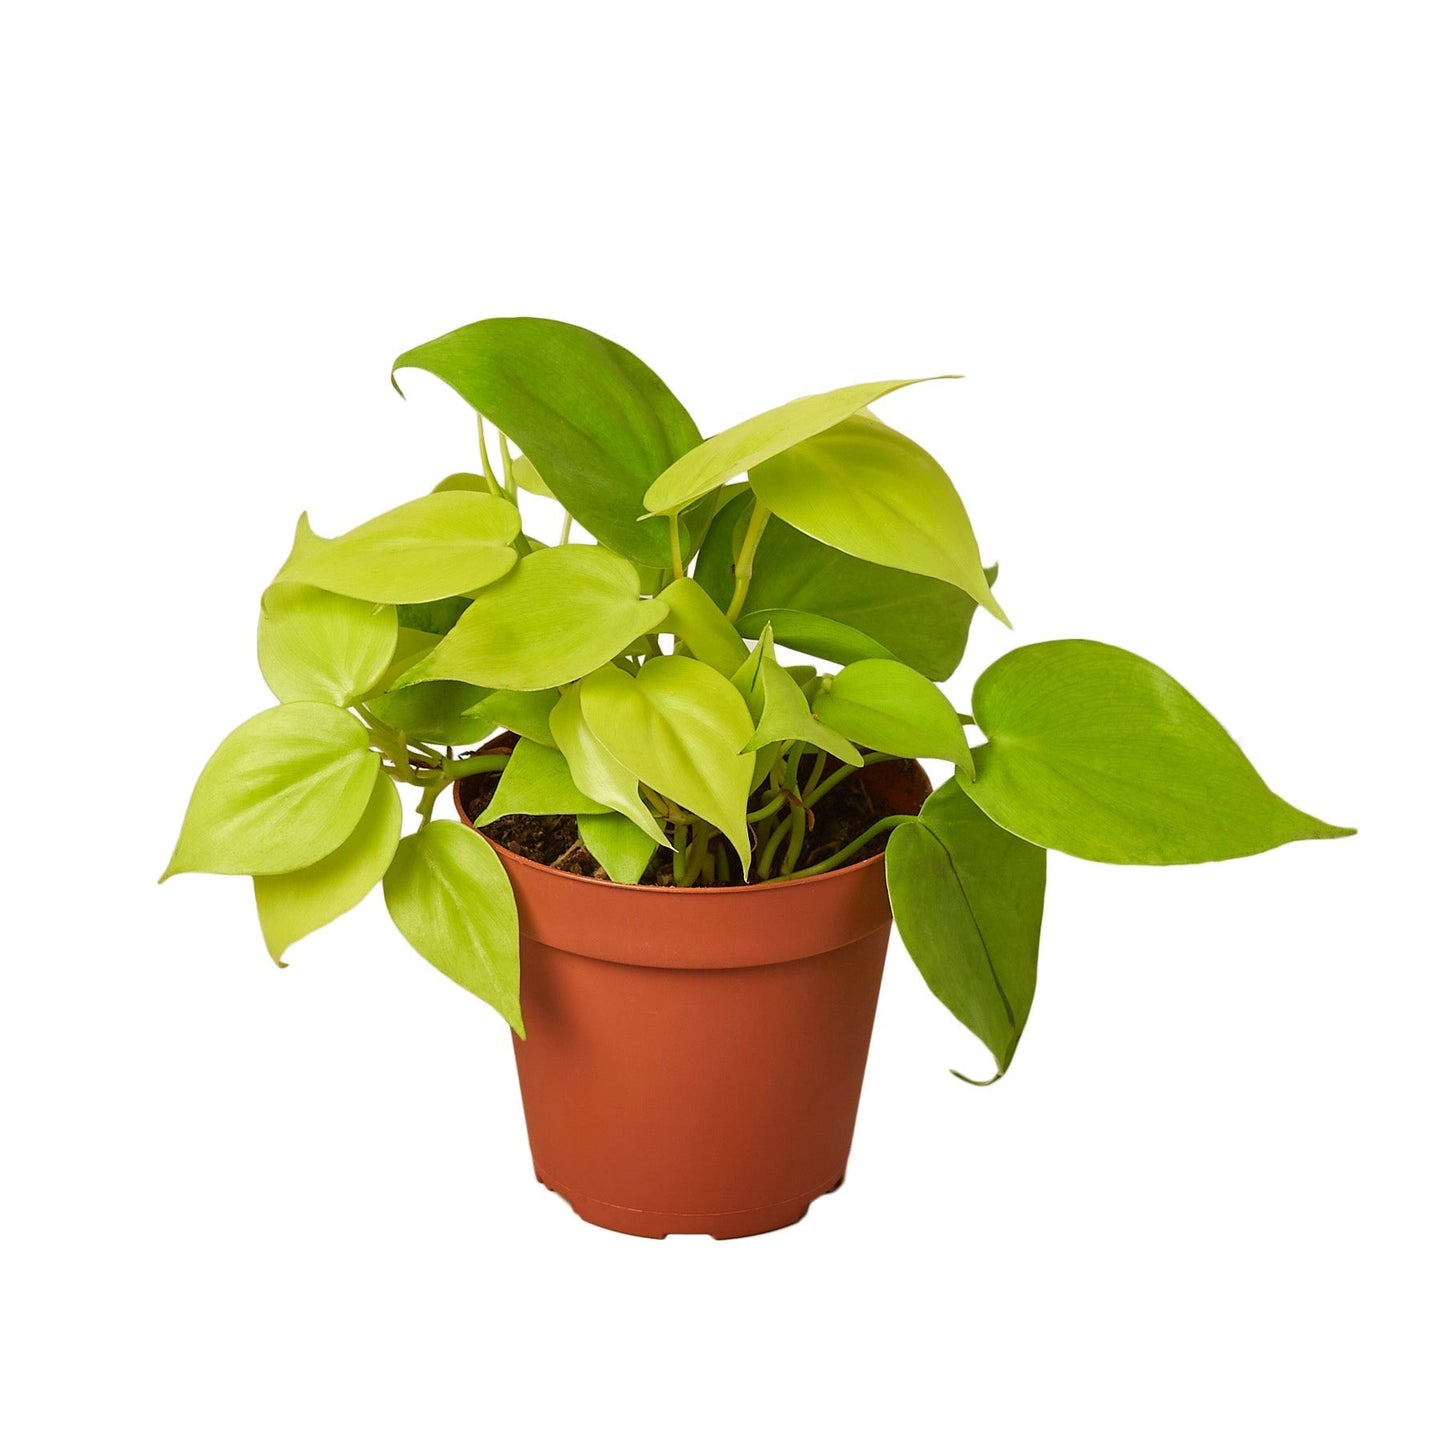 Philodendron 'Neon' - 6" Pot - NURSERY POT ONLY